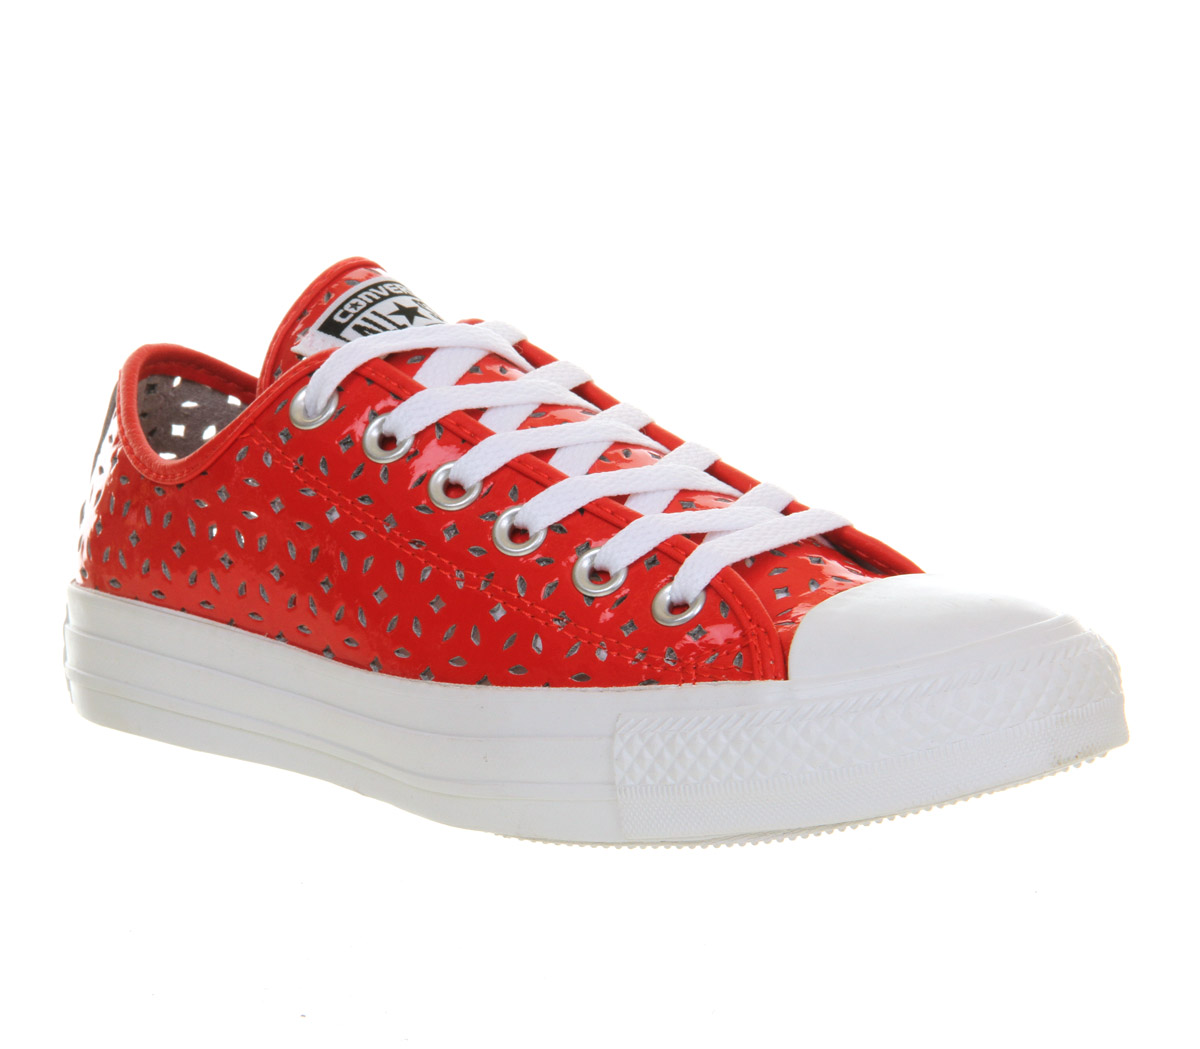 ConverseAllstar Low LeatherRed White Perforated